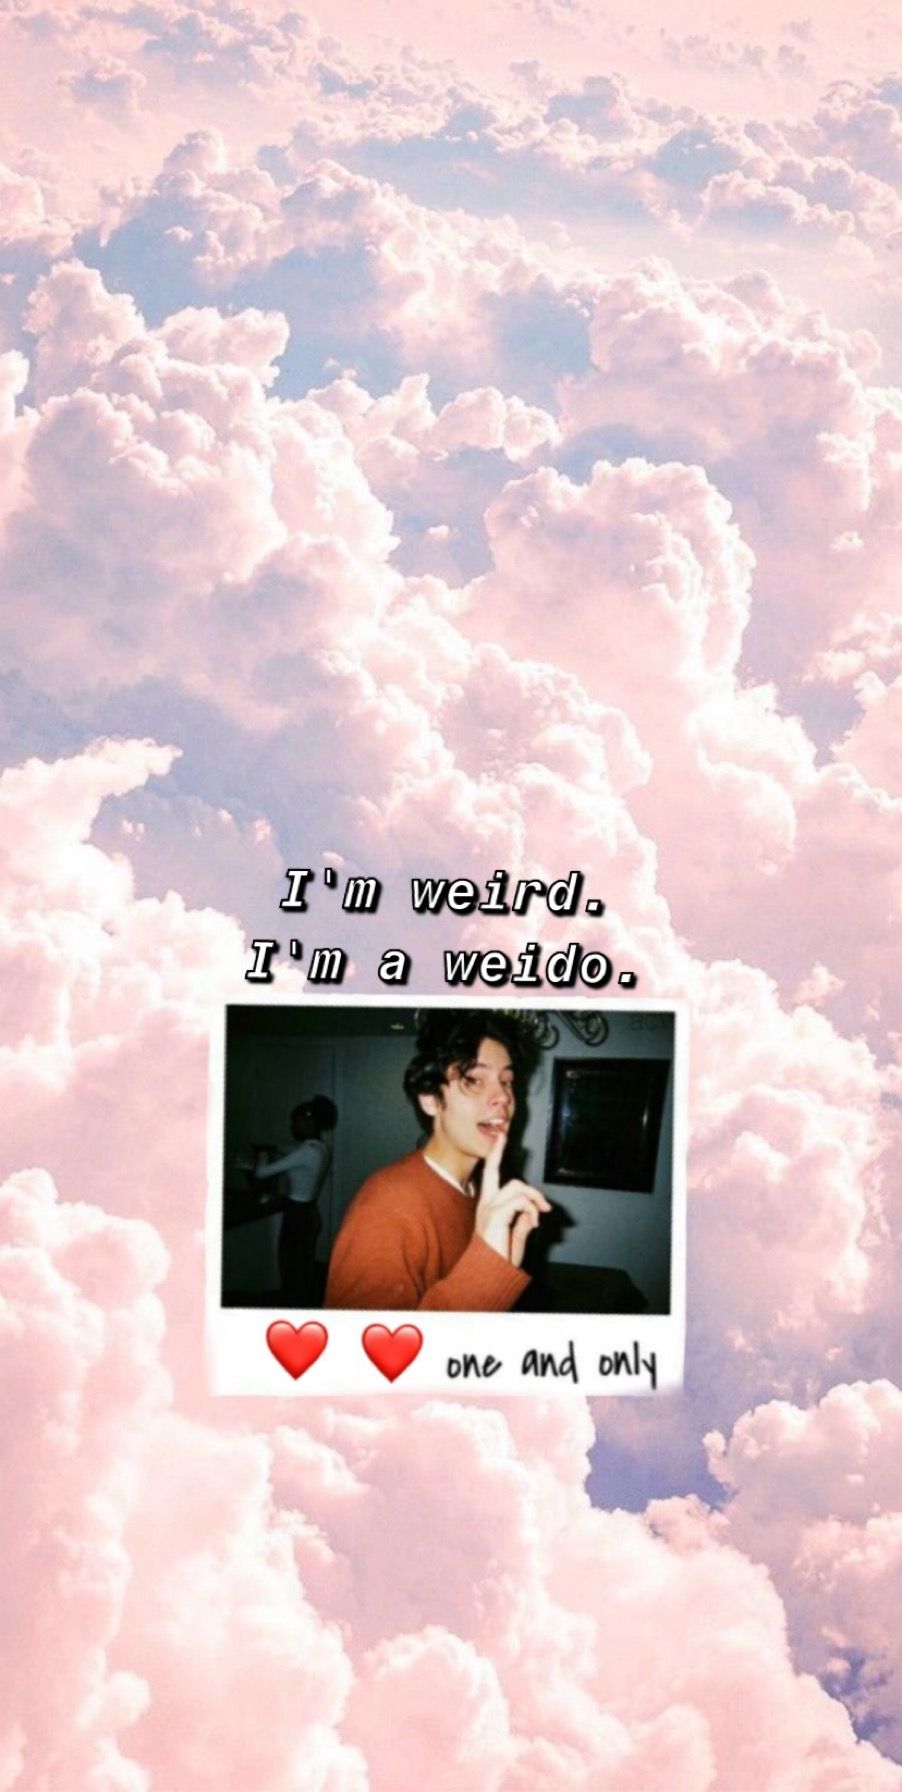 aesthetic #wallpaper #colesprouse #riverdale #pink #weirdo. Riverdale aesthetic, Cole sprouse wallpaper, Riverdale poster